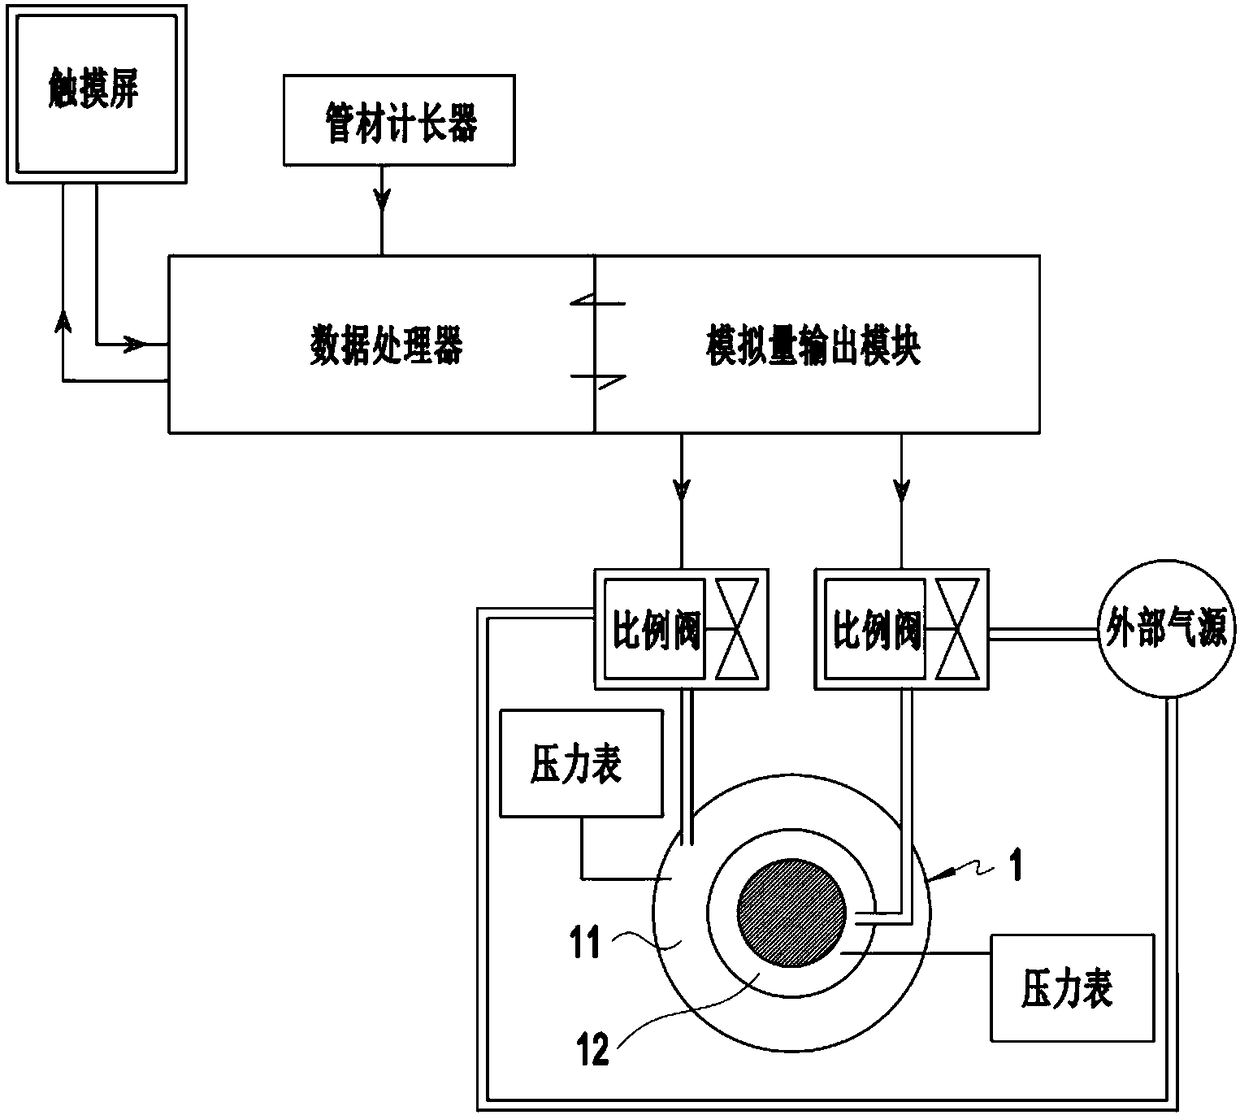 Control system for Interlayer gas and inner gas of bellows forming machine